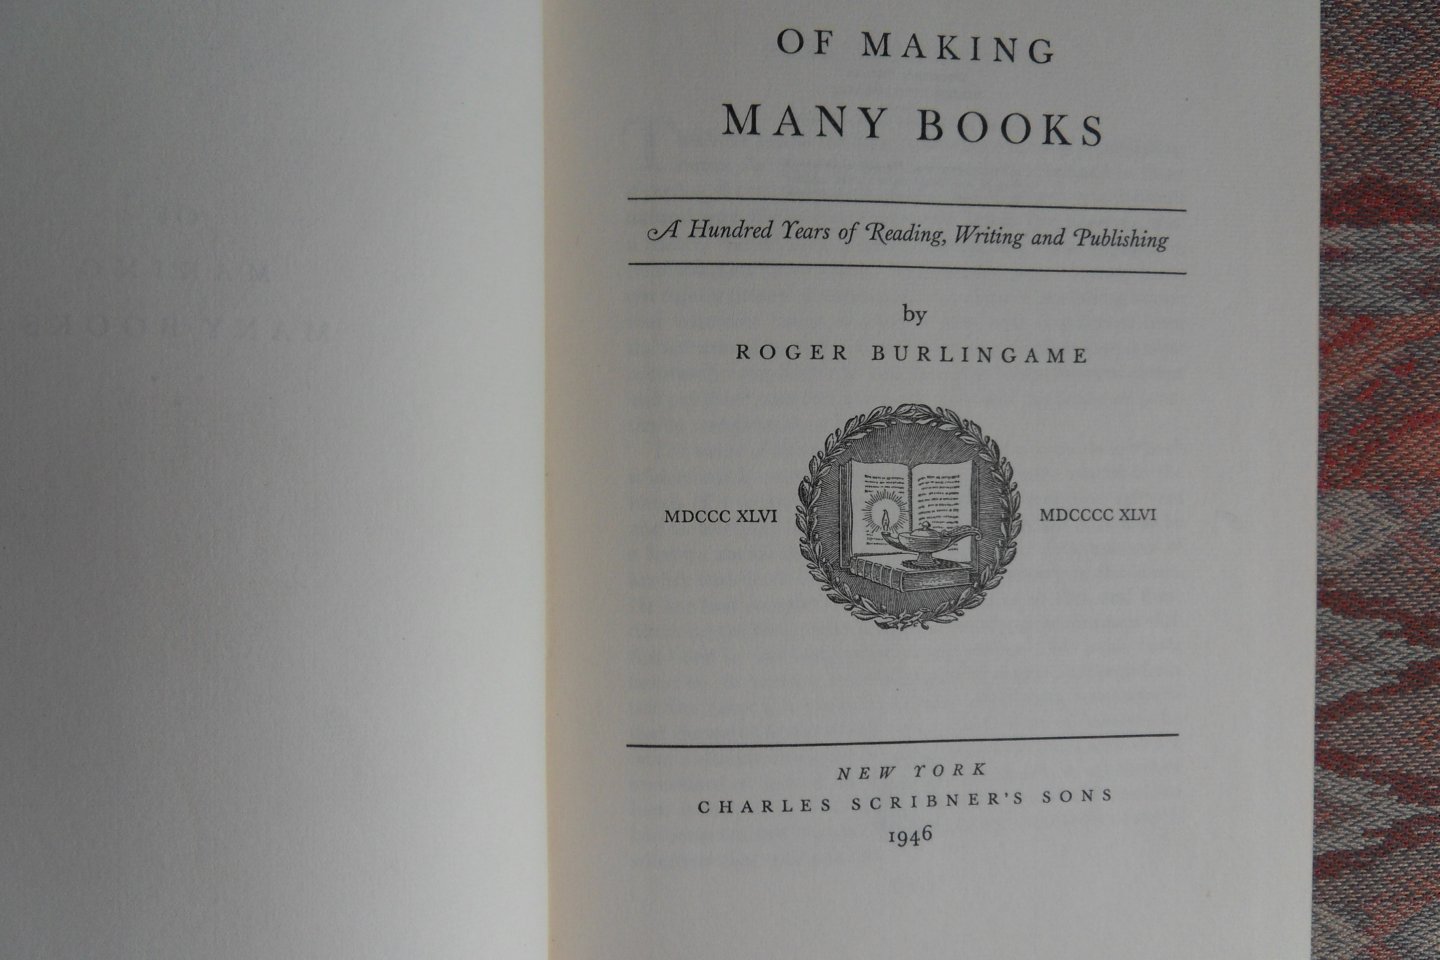 Burlingame, Roger. - Of Making Many Books. - A Hundred Years of Reading, Writing and Publishing.